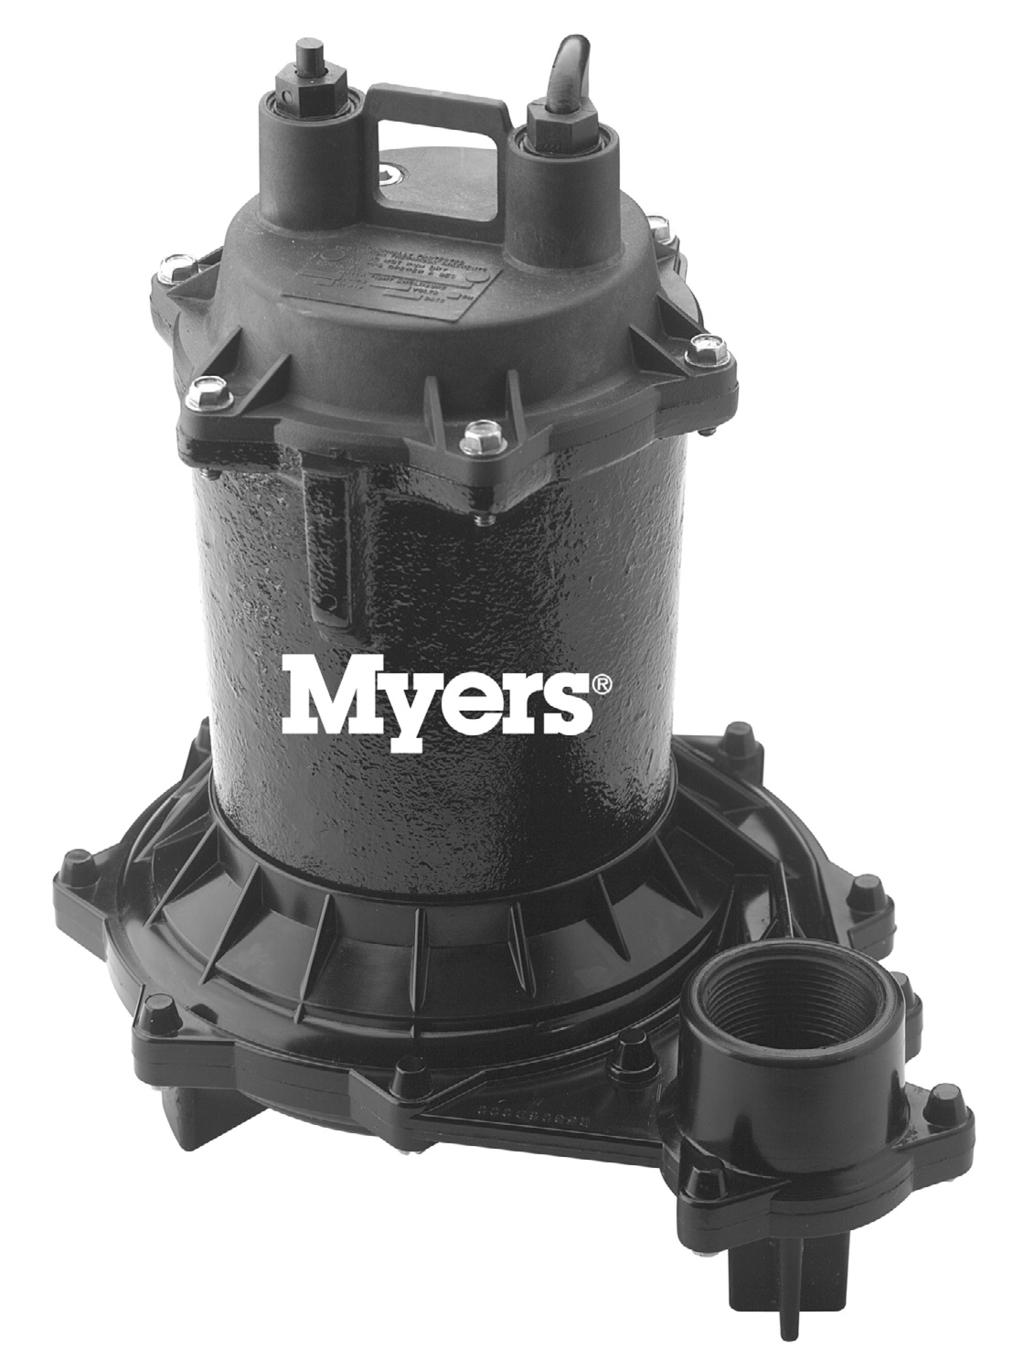 ME40/ME40AG SERIES Submersible Sump, Effluent & Sewage Pumps Installation and Service Manual